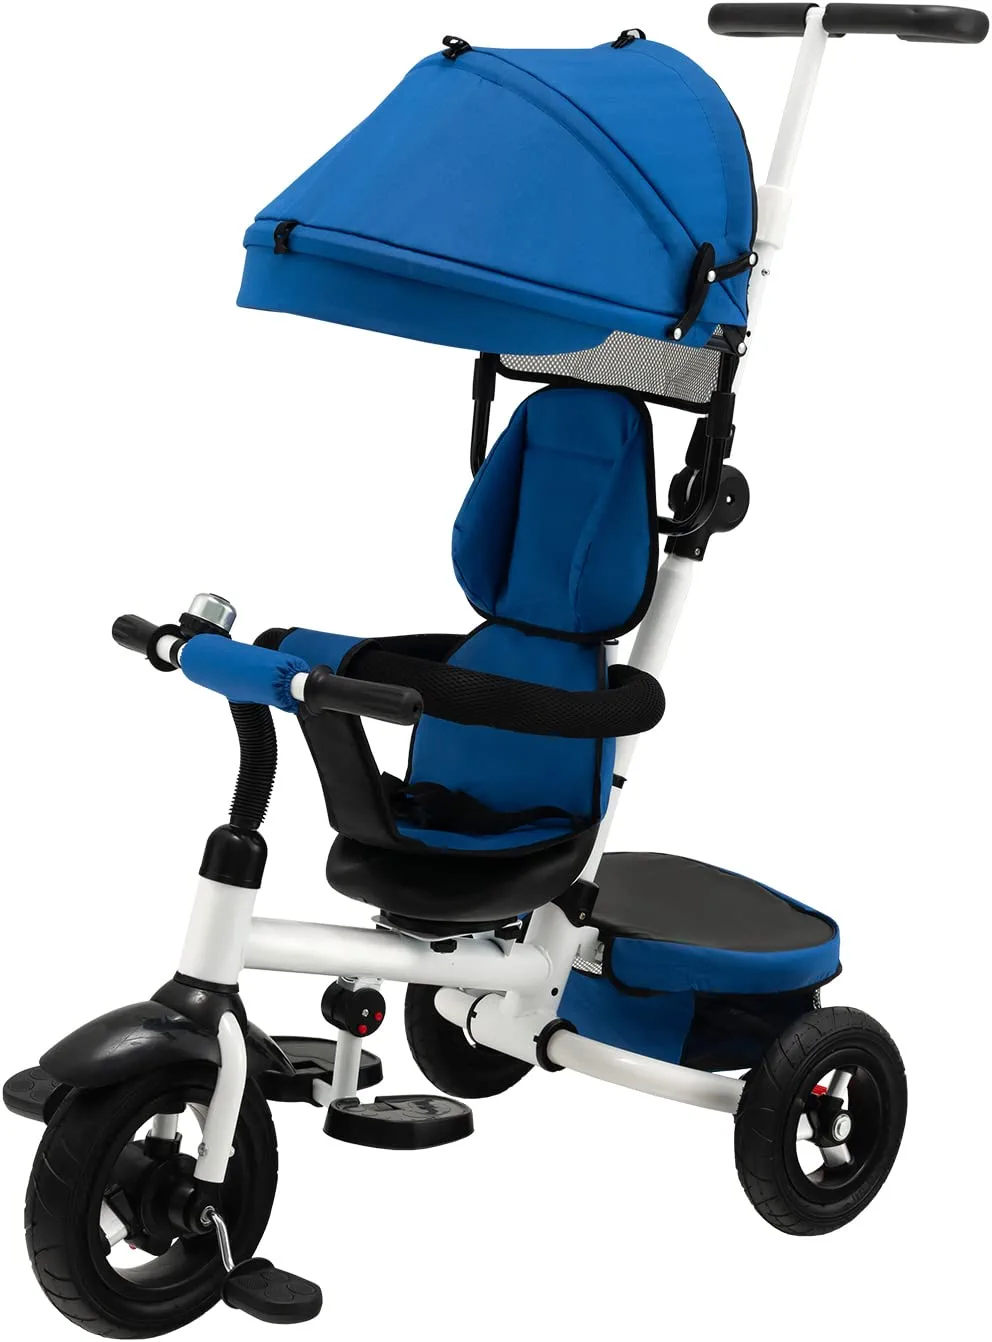 Costzon 6-in-1 Baby Tricycle